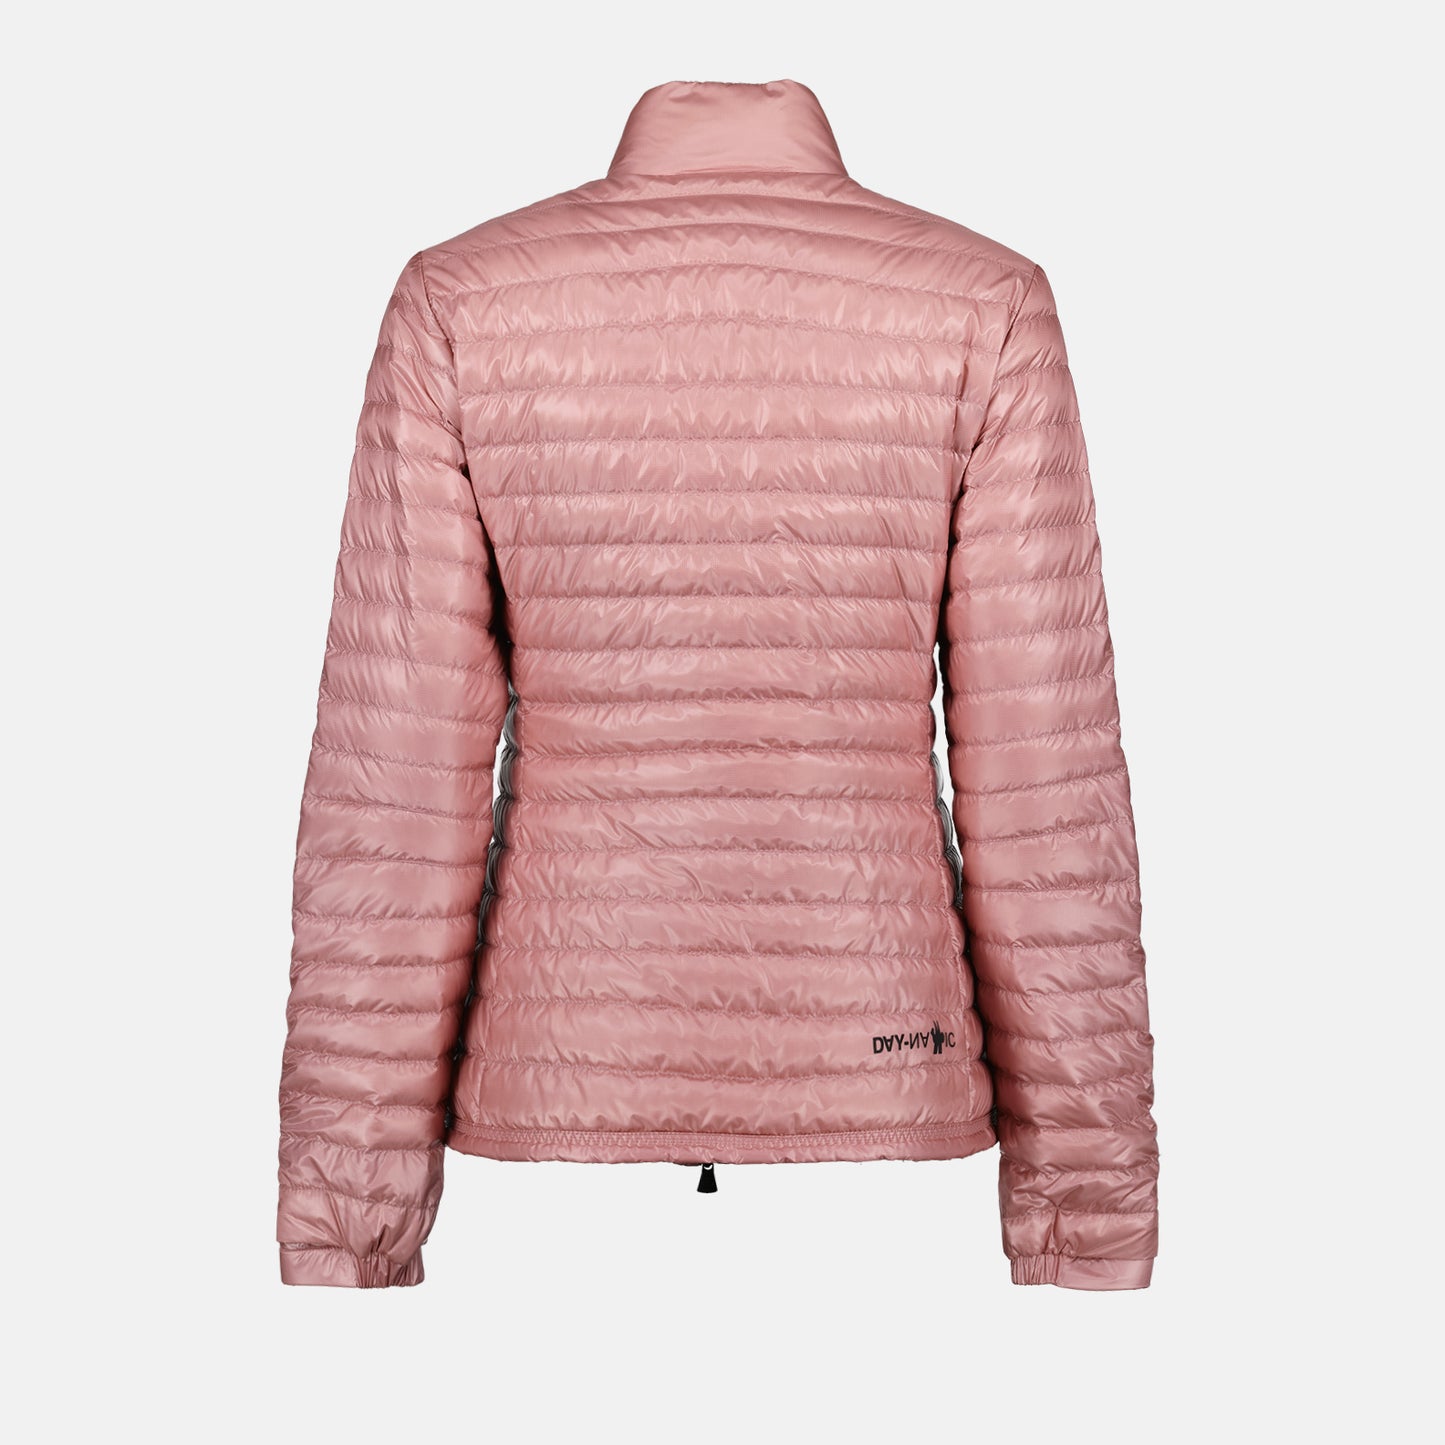 Pontaix quilted jacket